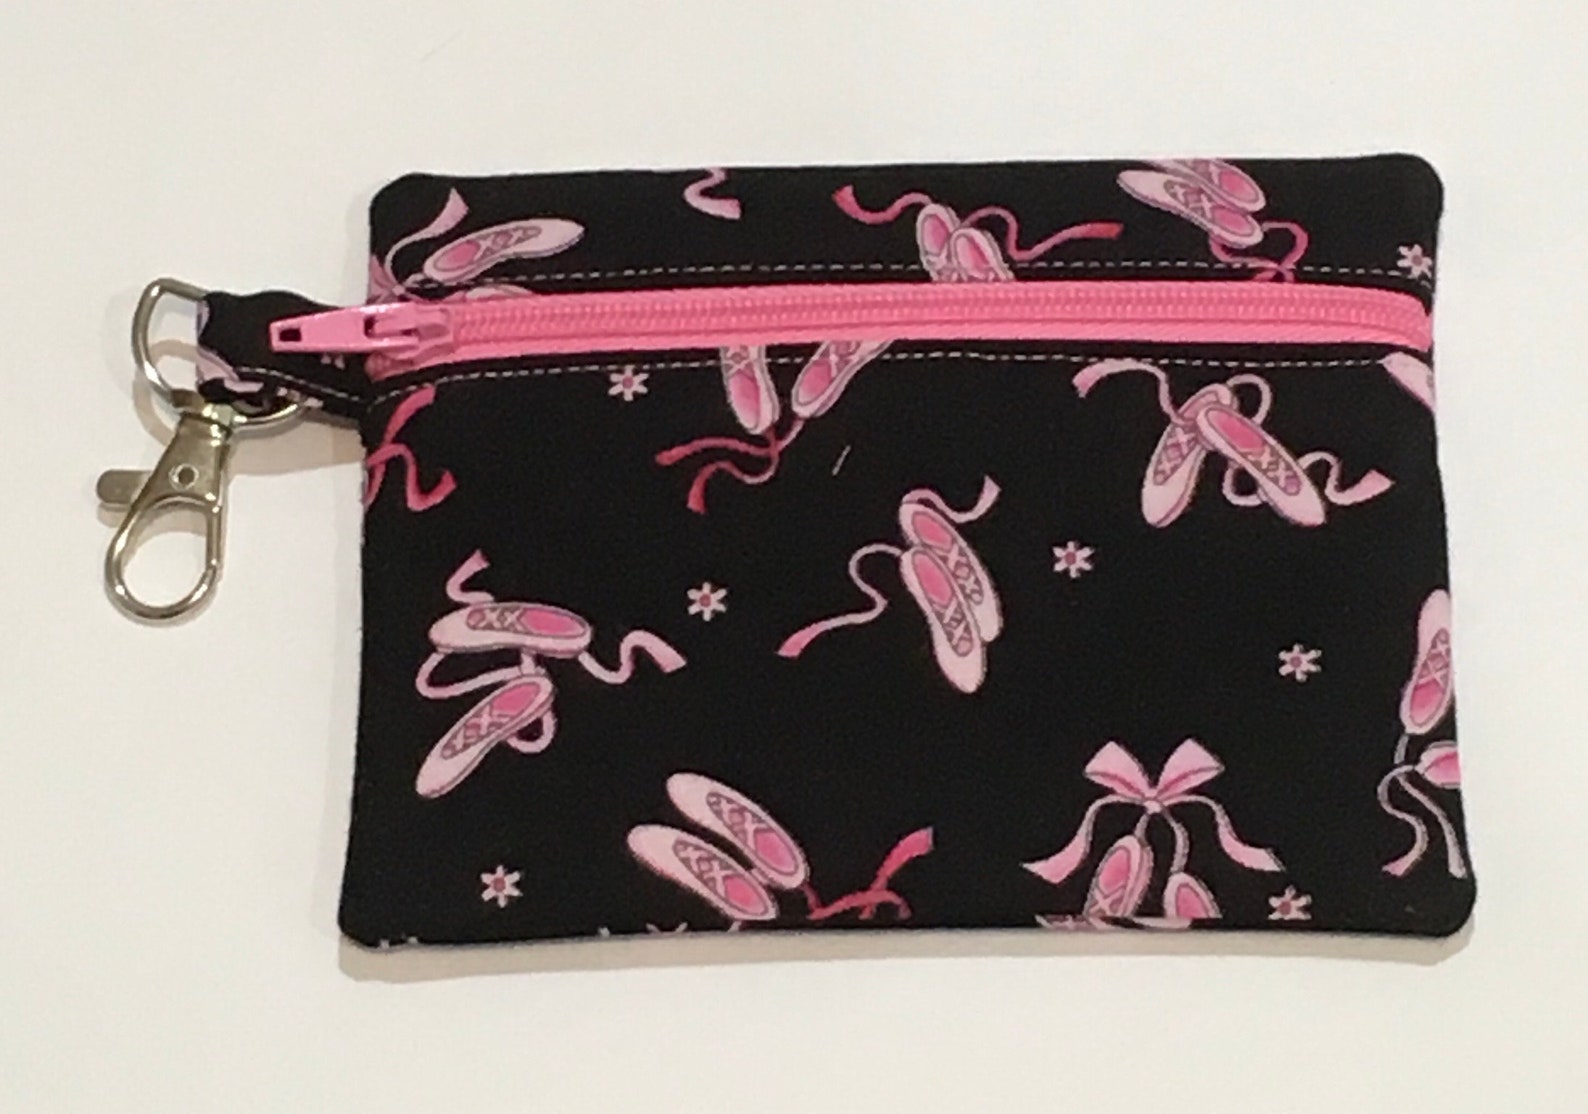 ballet shoes coin purse, card holder, earbud storage, small change purse, lunch money purse, zippered coin purse,